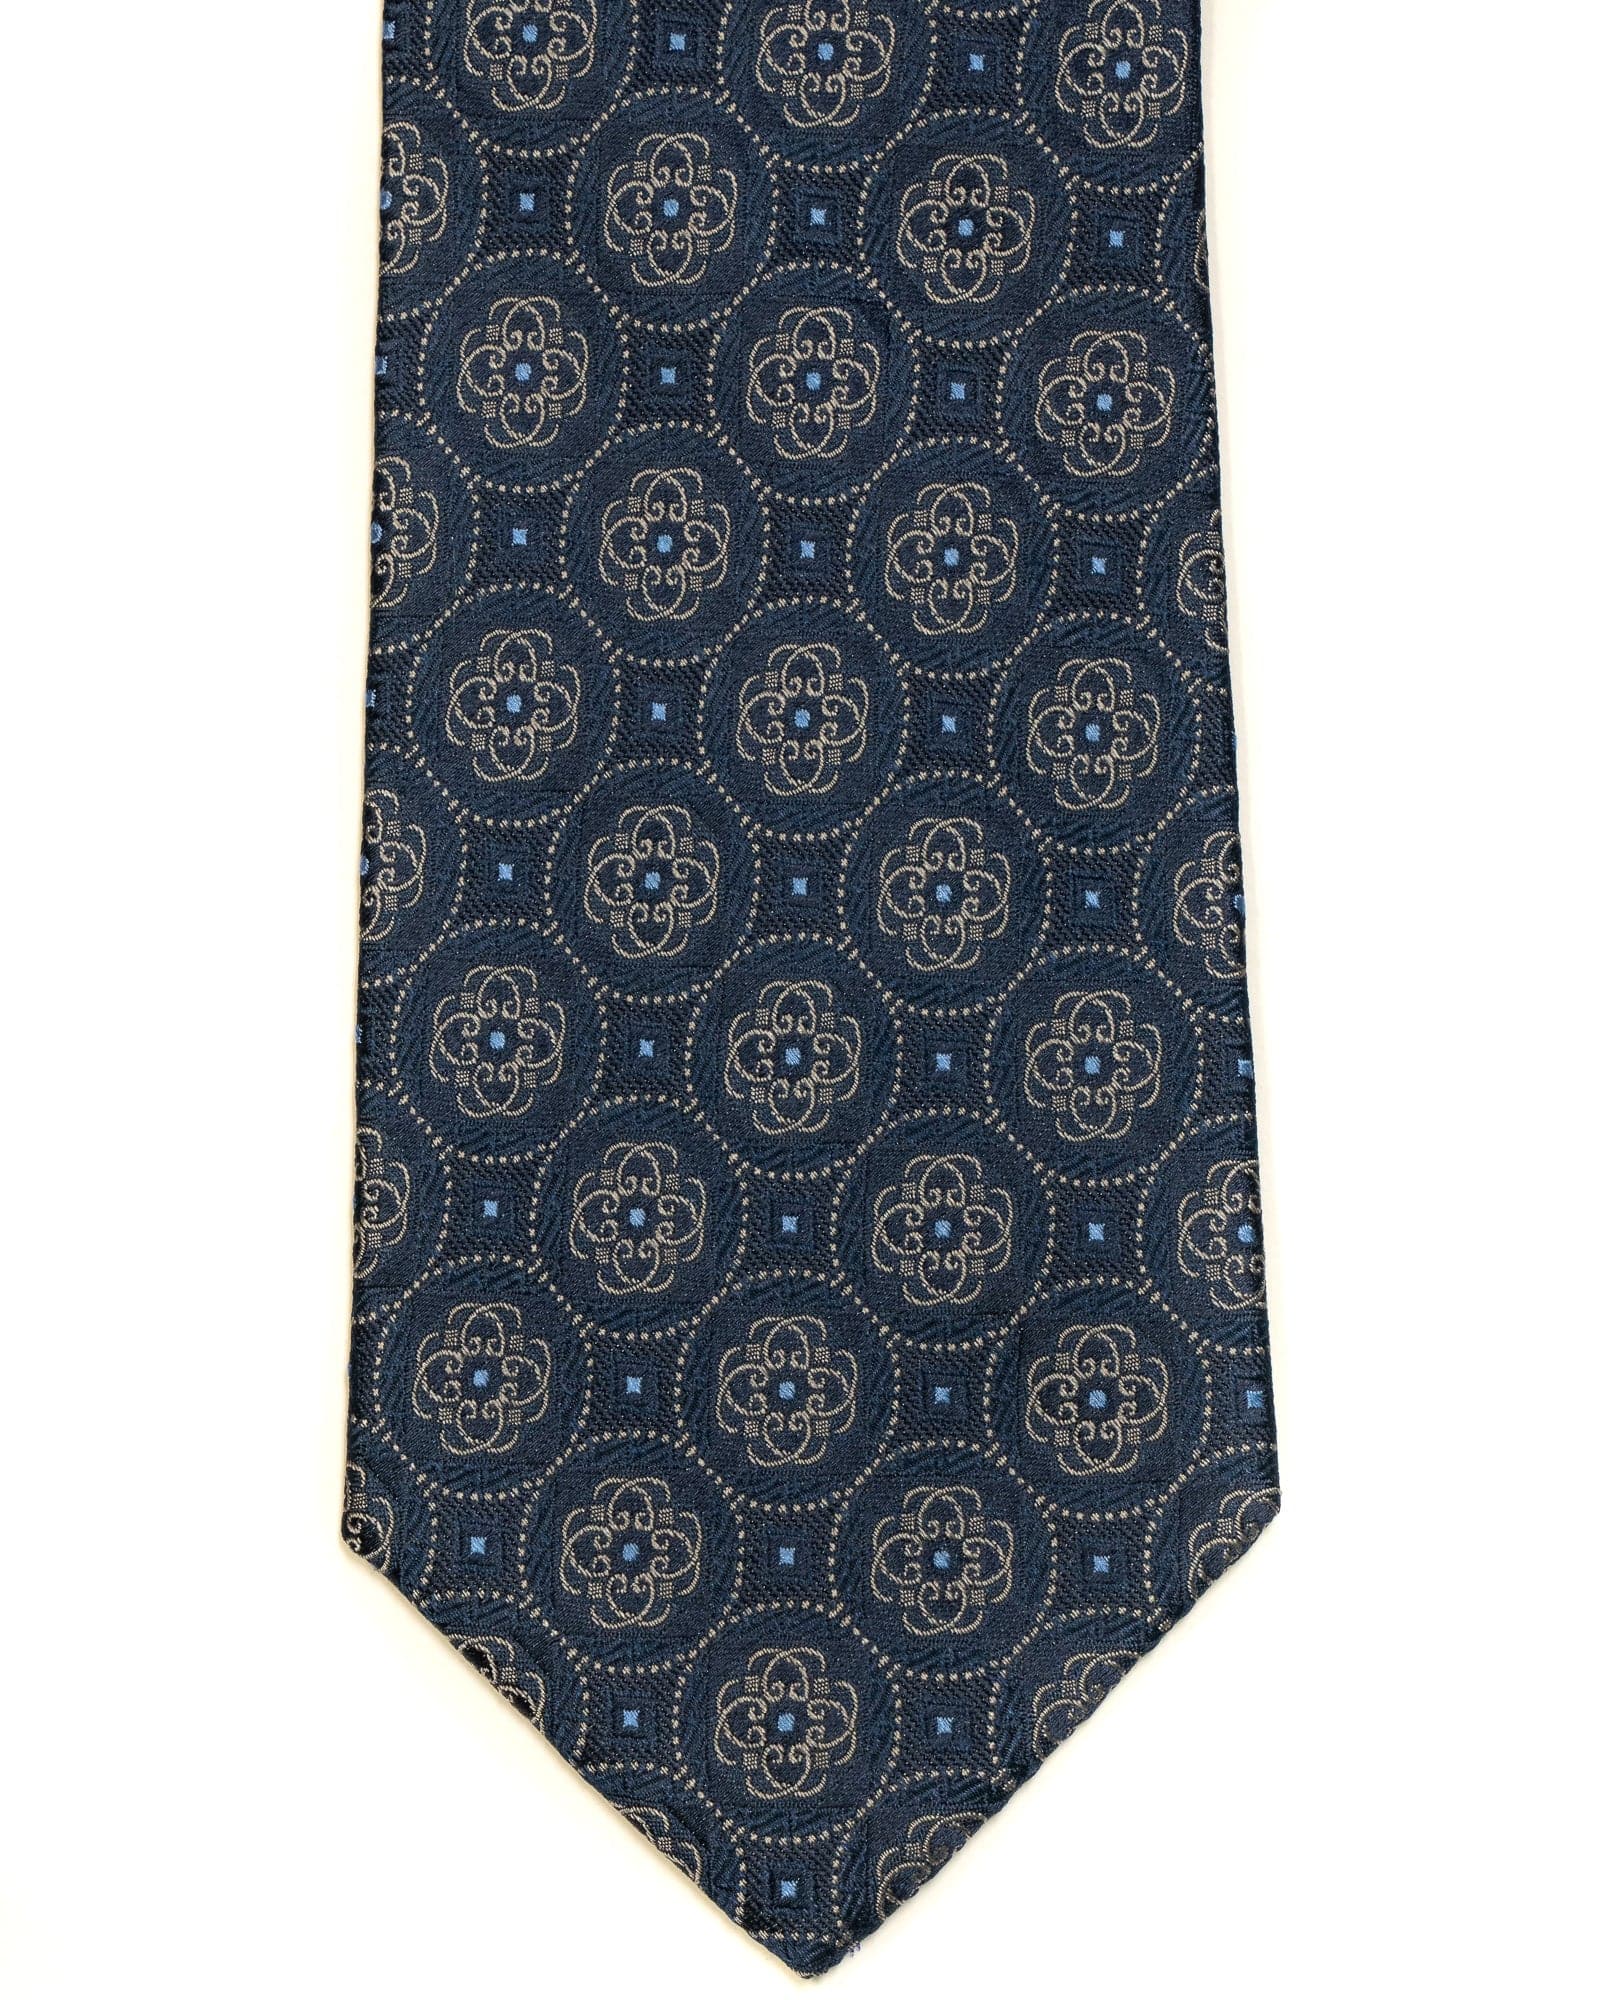 Silk Tie In Navy With Blue Medallion Circle Foulard Design - Rainwater's Men's Clothing and Tuxedo Rental